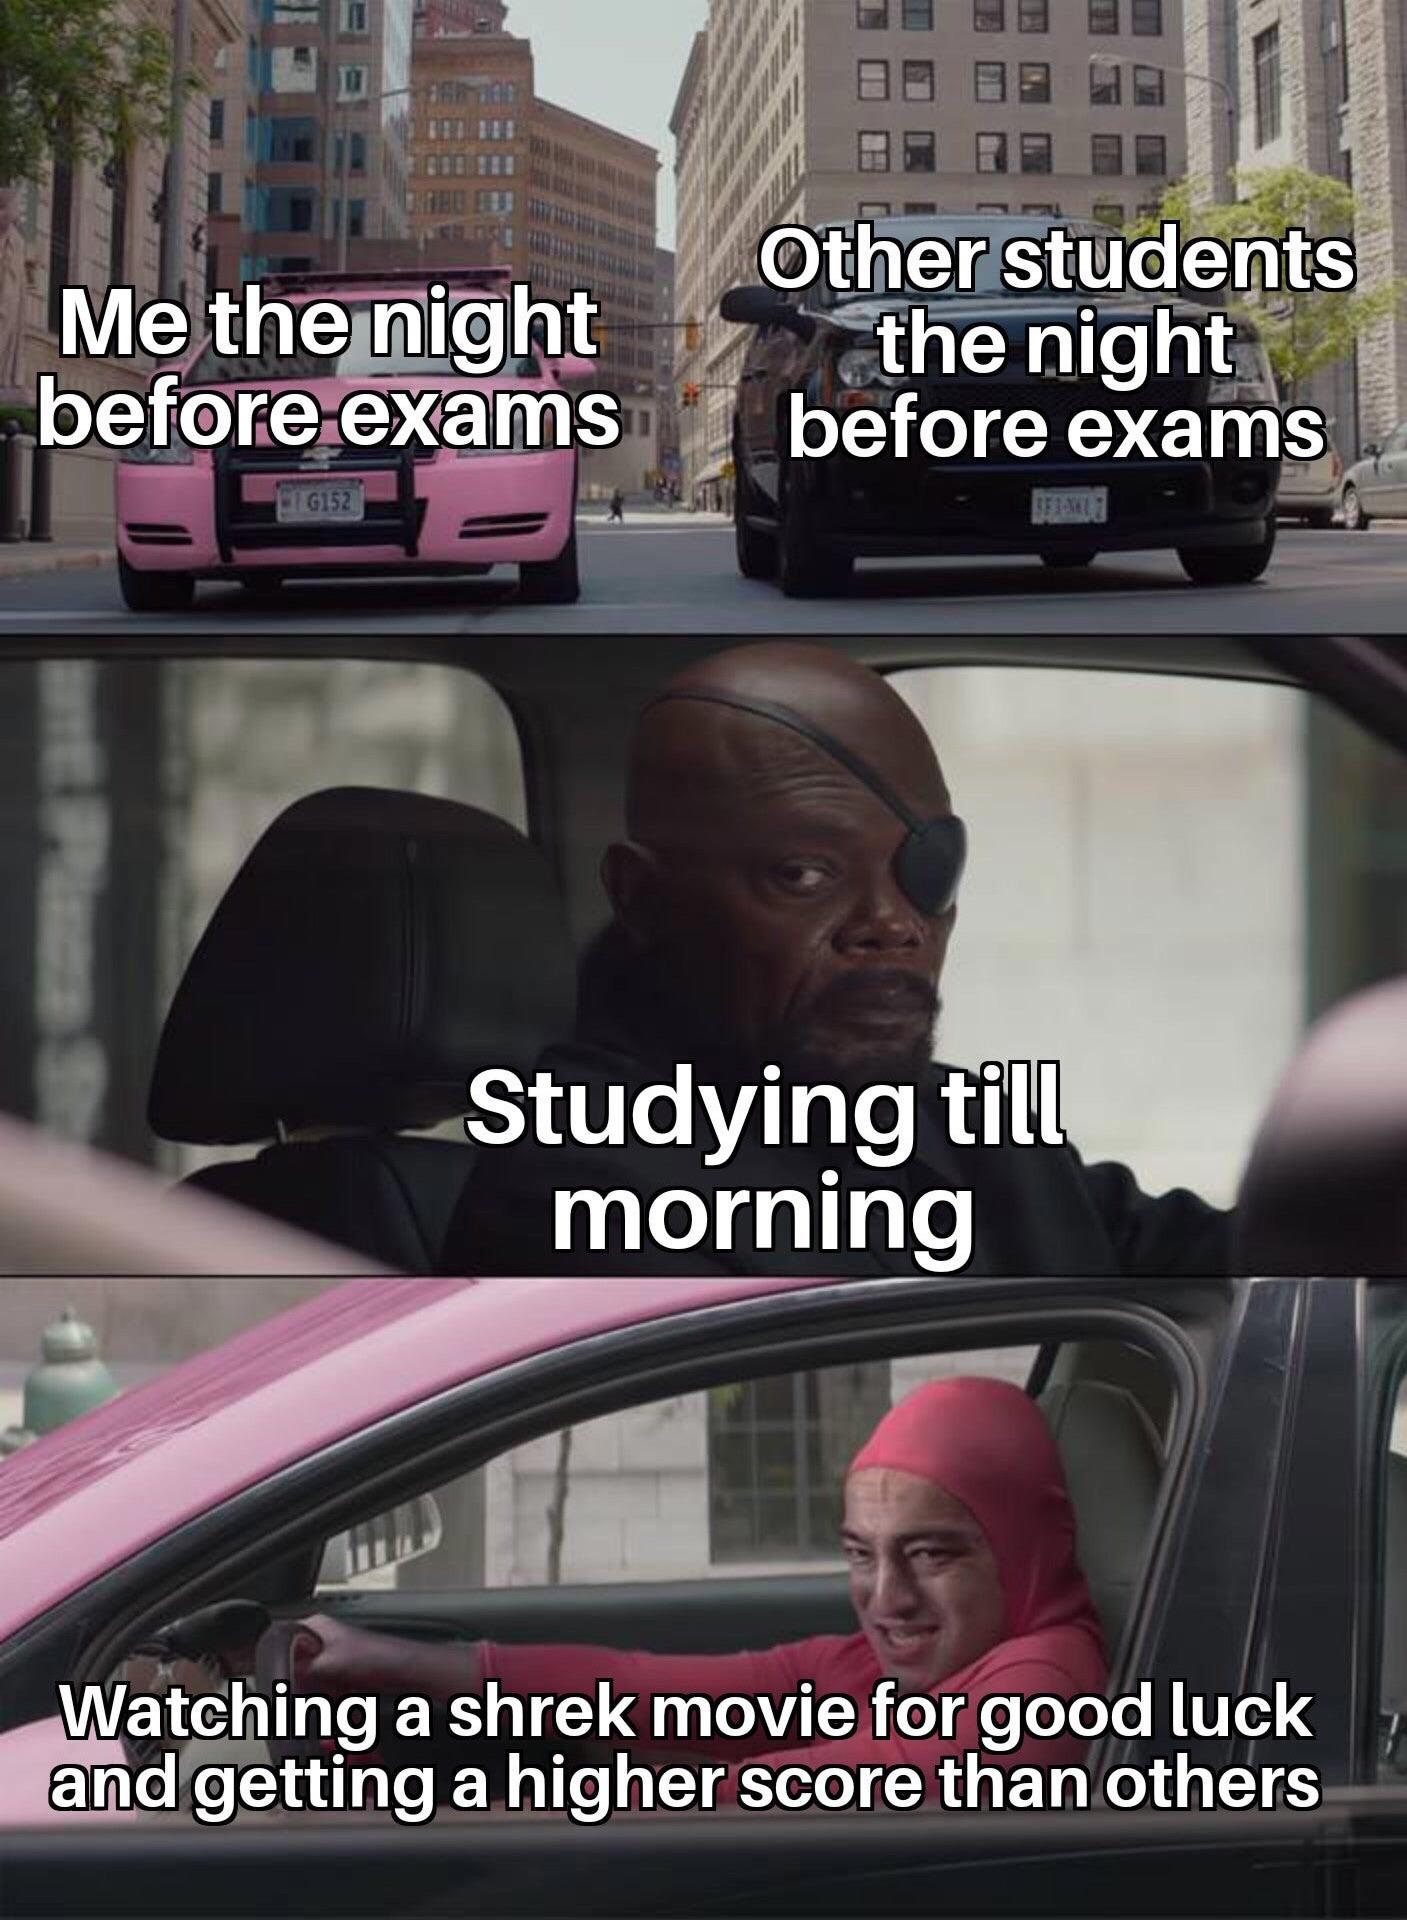 funny memes - fredo corleone memes - Im Me the night before exams Other students the night before exams G152 19 Studying till morning Watching a shrek movie for good luck and getting a higher score than others